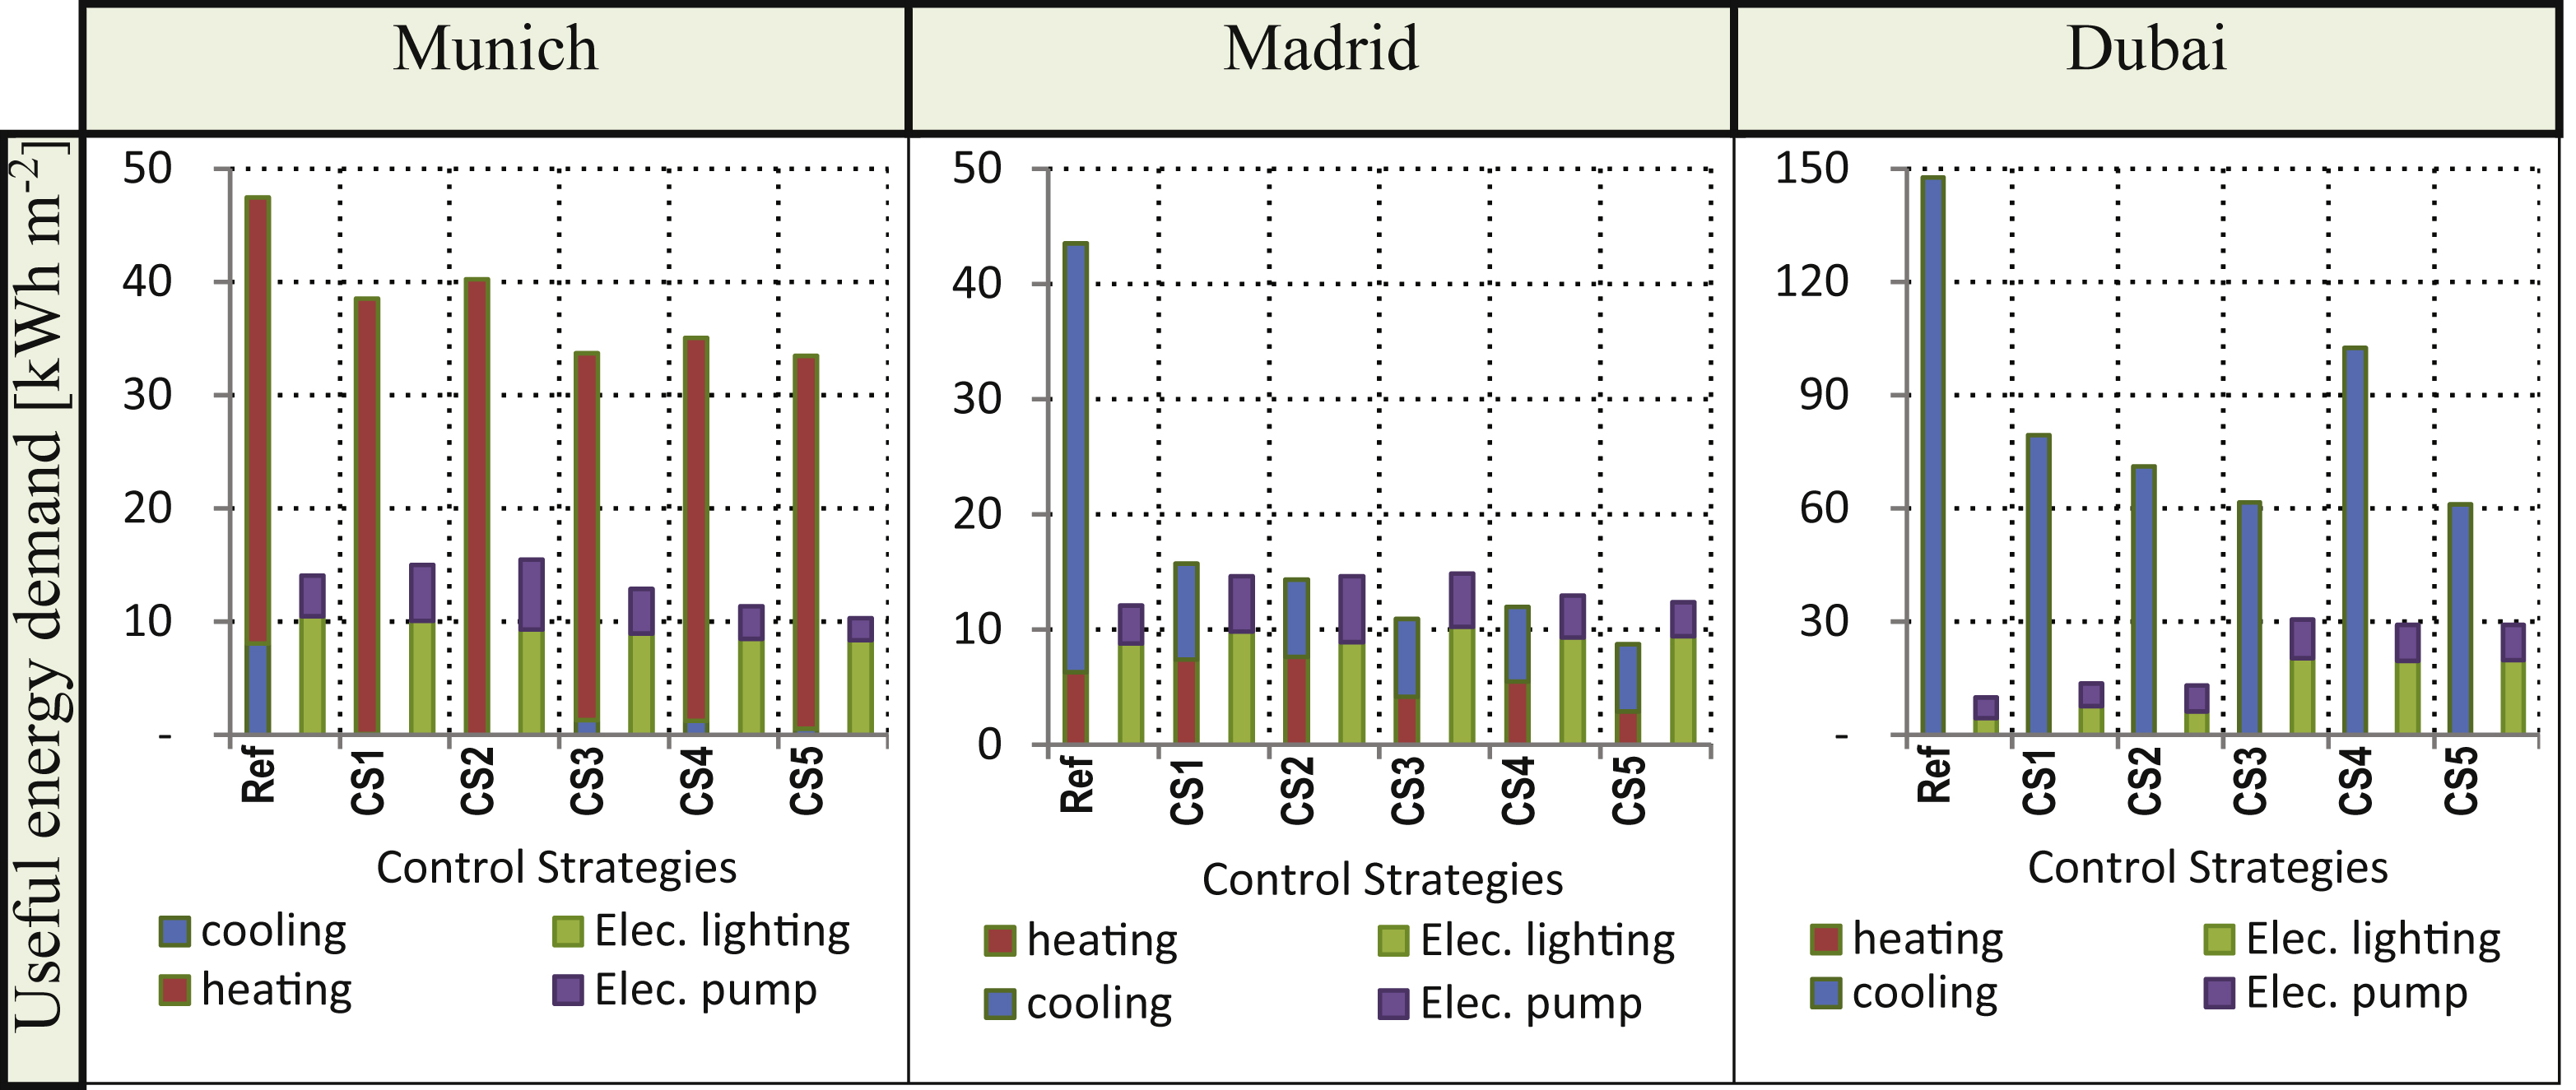 Resulting annual useful energy demand [kWh/m2] of heating, cooling and electrical energy demand for lighting and auxiliary pumps, generated with the different control strategies (CS1 to CS5) compared to the reference building (Ref) of the building type M in Munich, Madrid and Dubai.